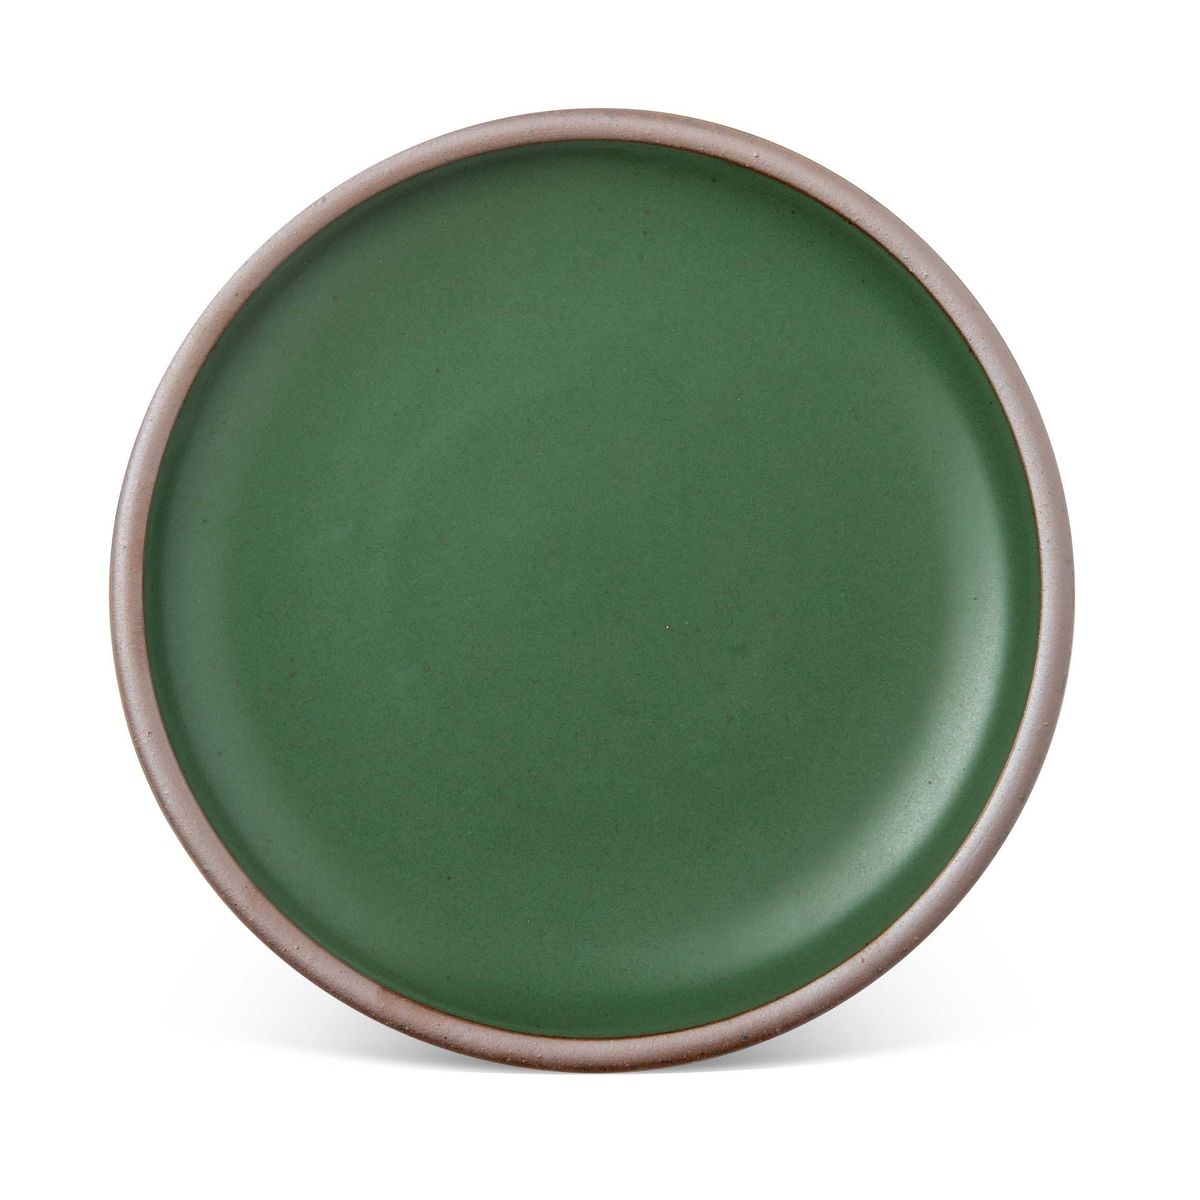 A large ceramic platter in a deep, verdant green color featuring iron speckles and an unglazed rim